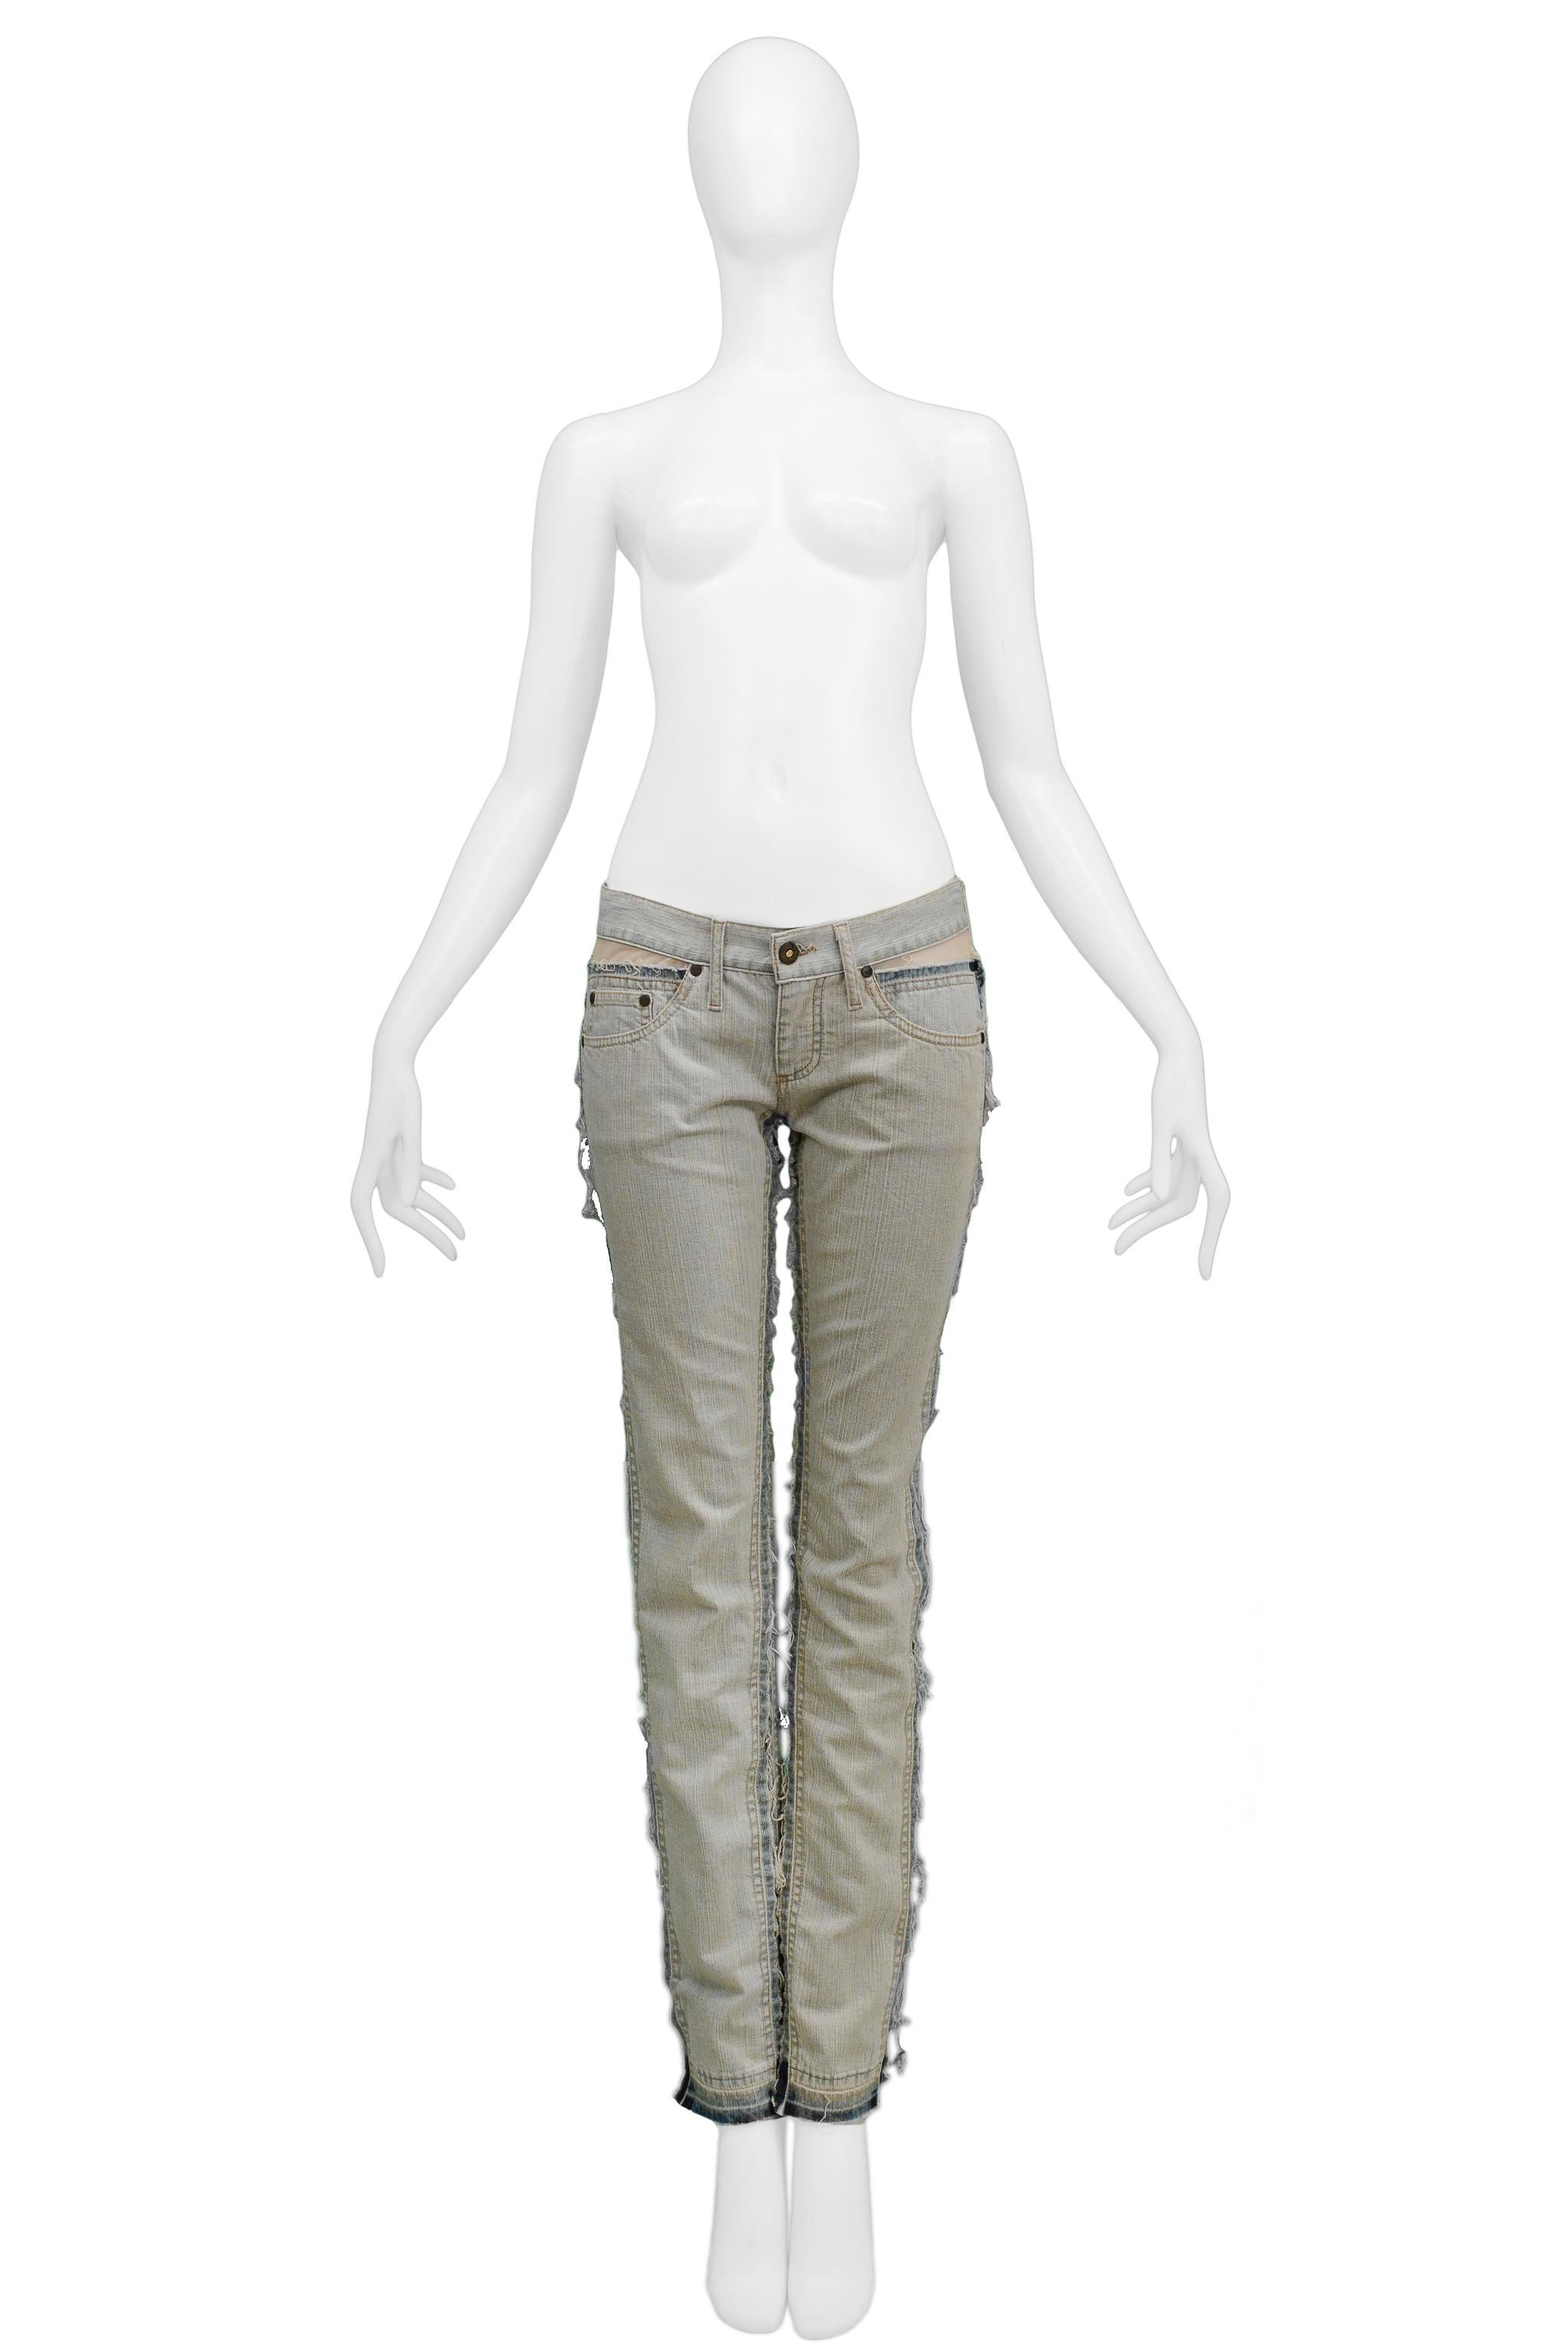 Resurrection is excited to offer a pair of vintage Alexander McQueen light denim jeans featuring mesh panel inserts on the inside and outside of the legs and on front and back yoke, five pockets, and skinny legs. 

Alexander McQueen Label
Size